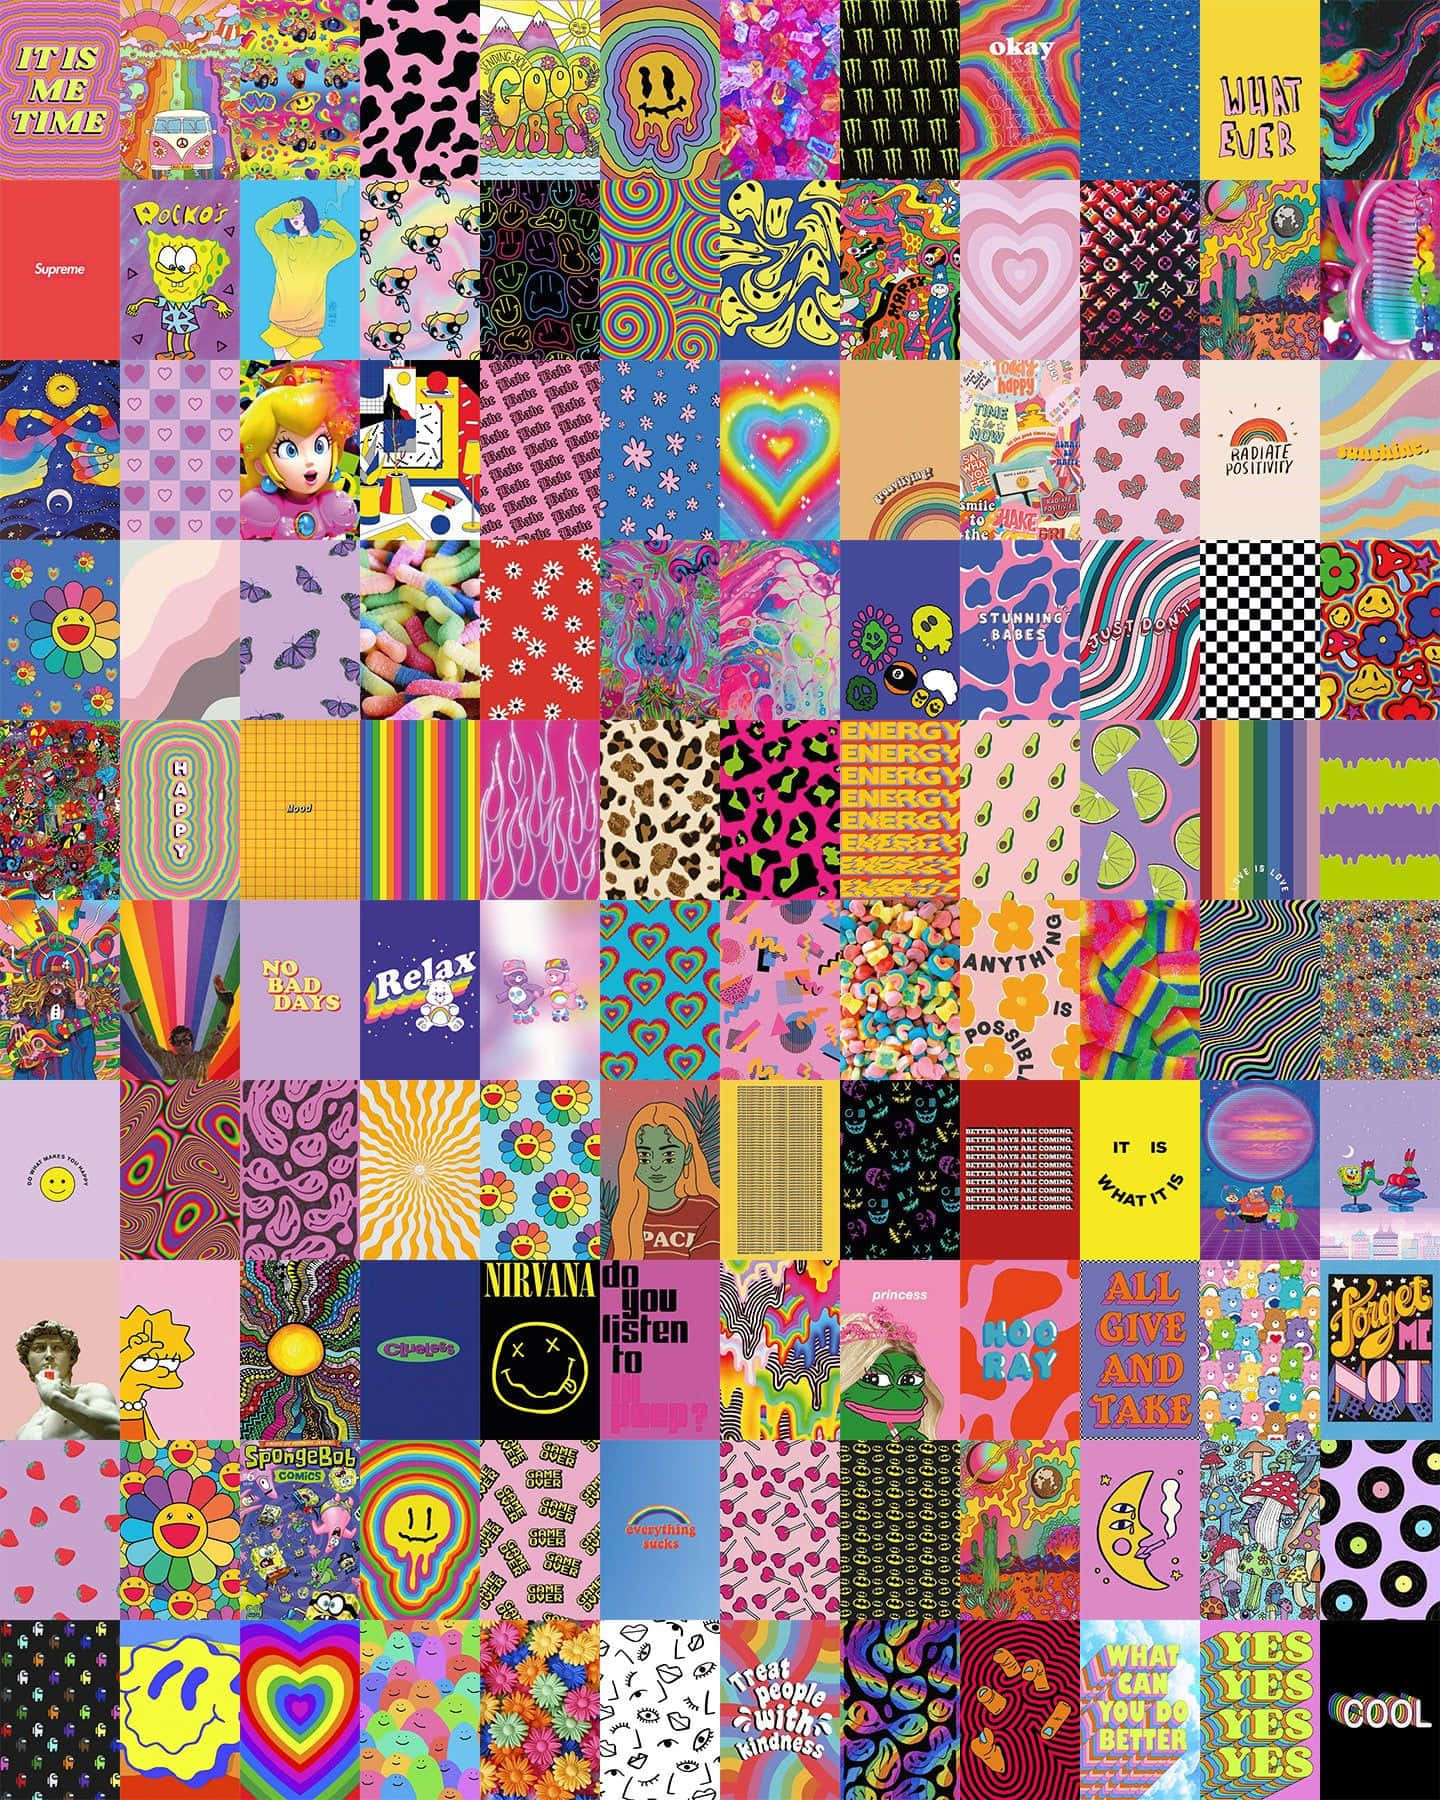 A Collage Of Various Colorful Patterns And Designs